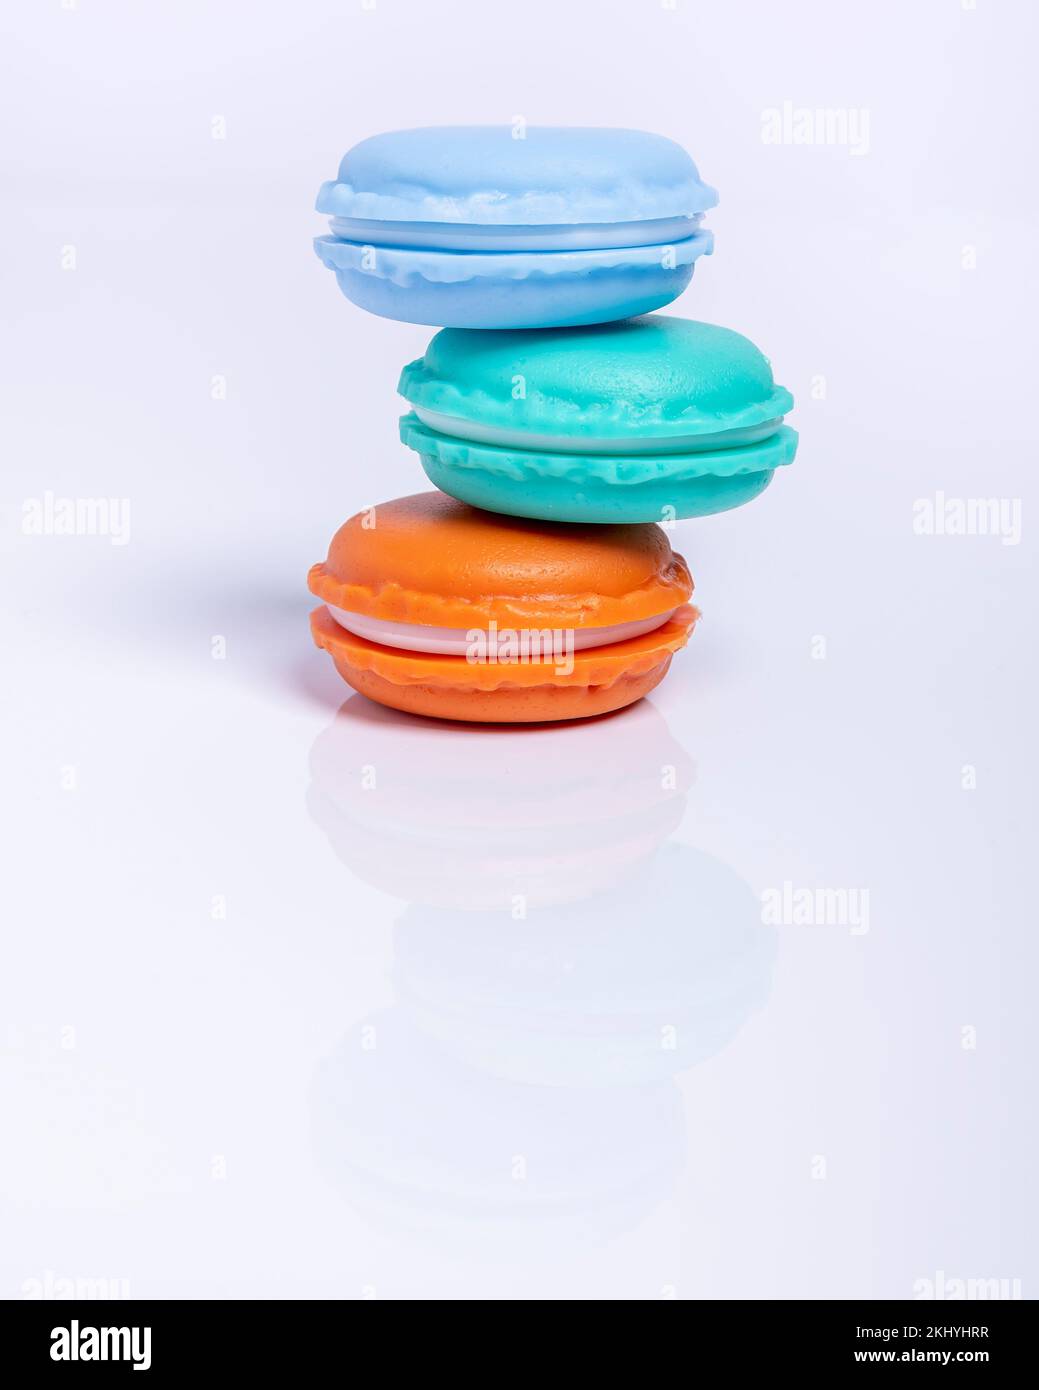 Three macarons of three different colors non-symmetrically stacked, on a white background Stock Photo